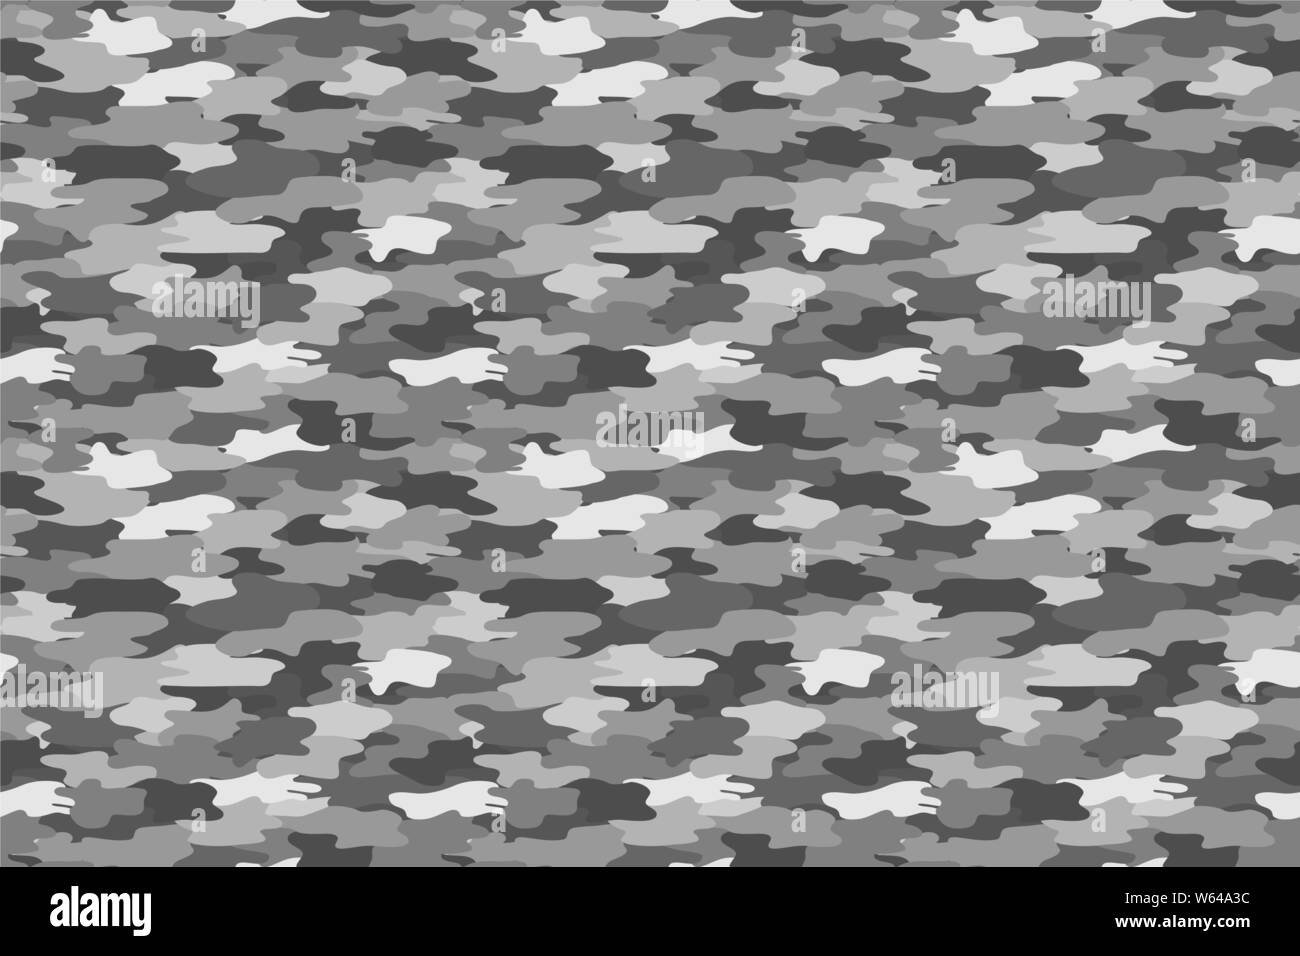 Grey military color seamless print pattern. Army clothing. Vector illustration. Stock Vector